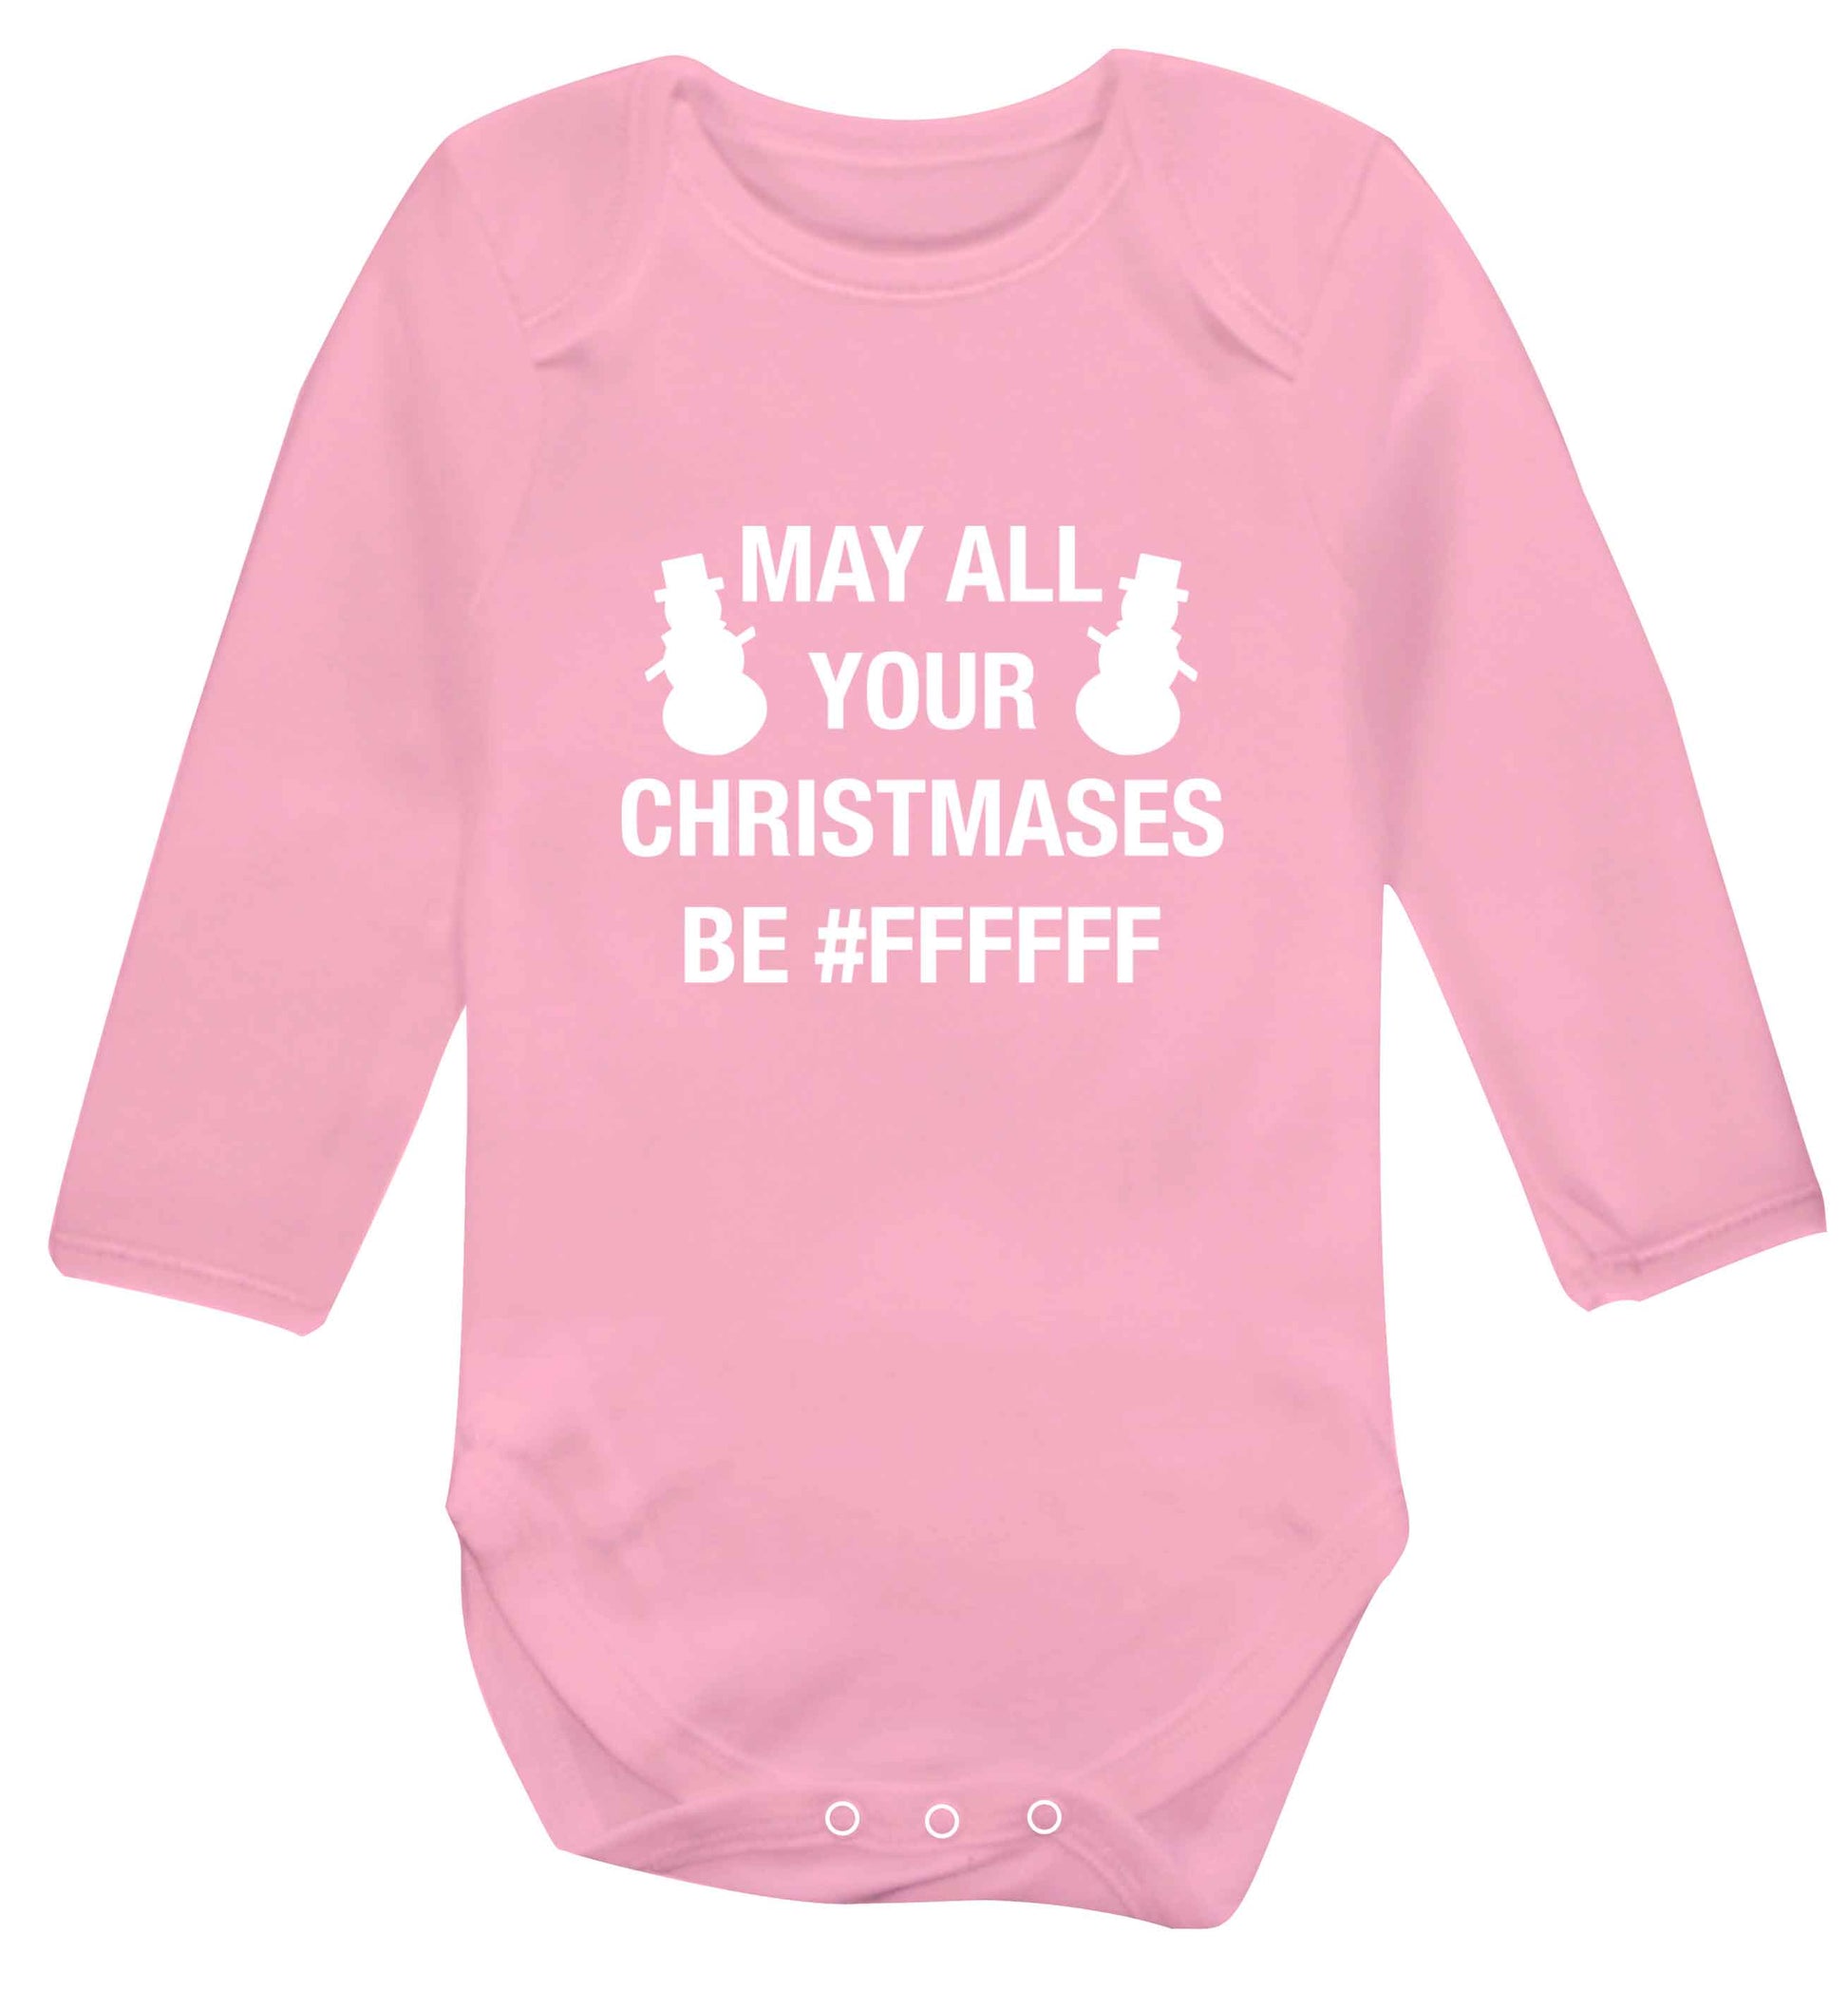 May all your Christmases be #FFFFFF baby vest long sleeved pale pink 6-12 months